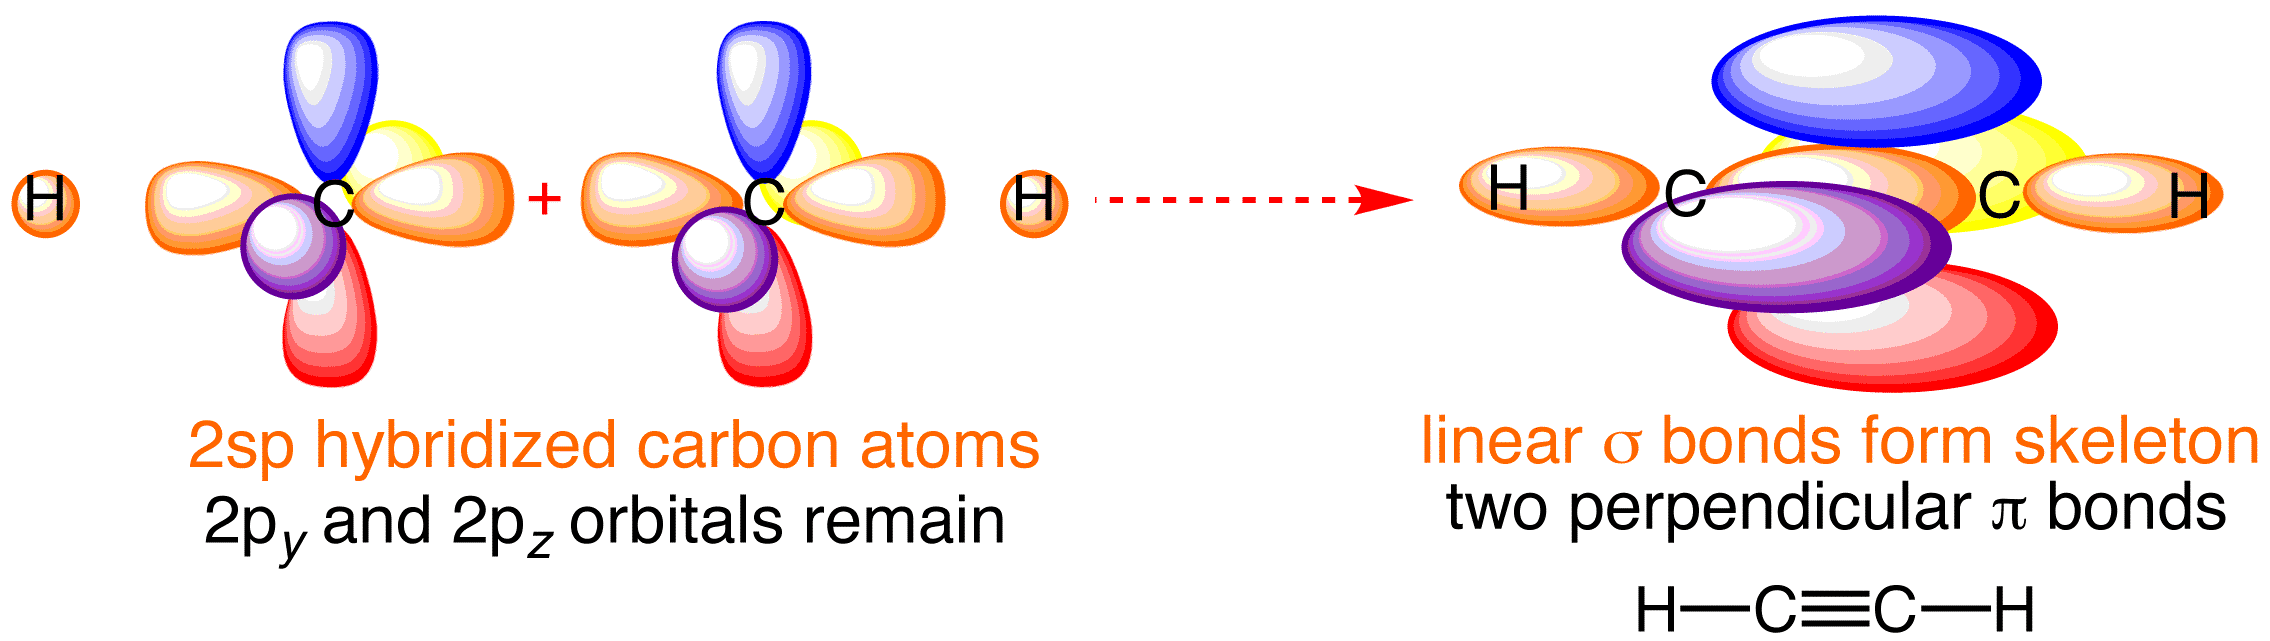 14+ Hcch Lewis Structure | Robhosking Diagram